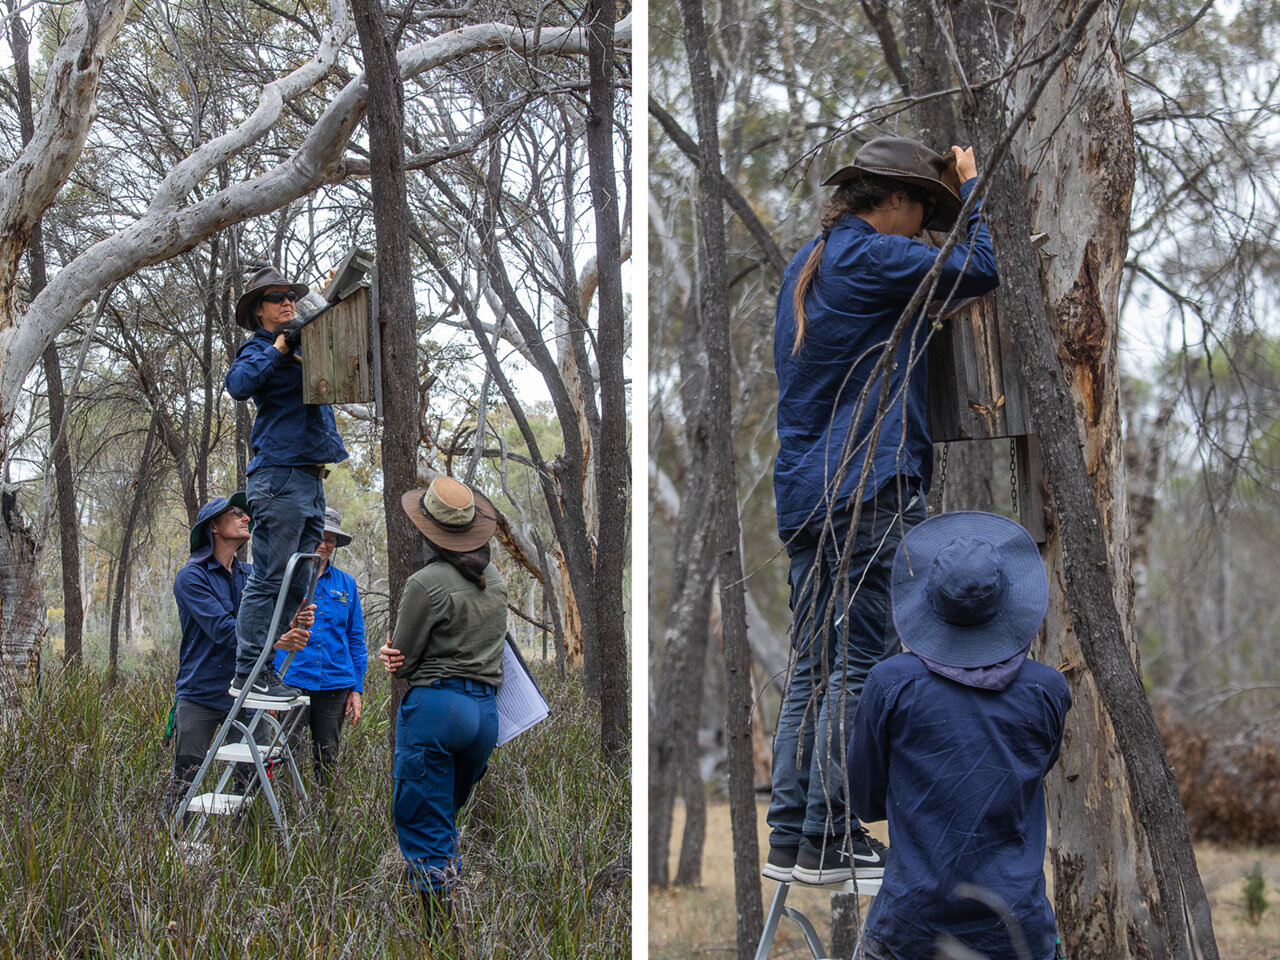 The Bush Heritage Australia ecologists inspect one of the nesting boxes set up for the red-tailed phascogales in the Kojonup Reserve